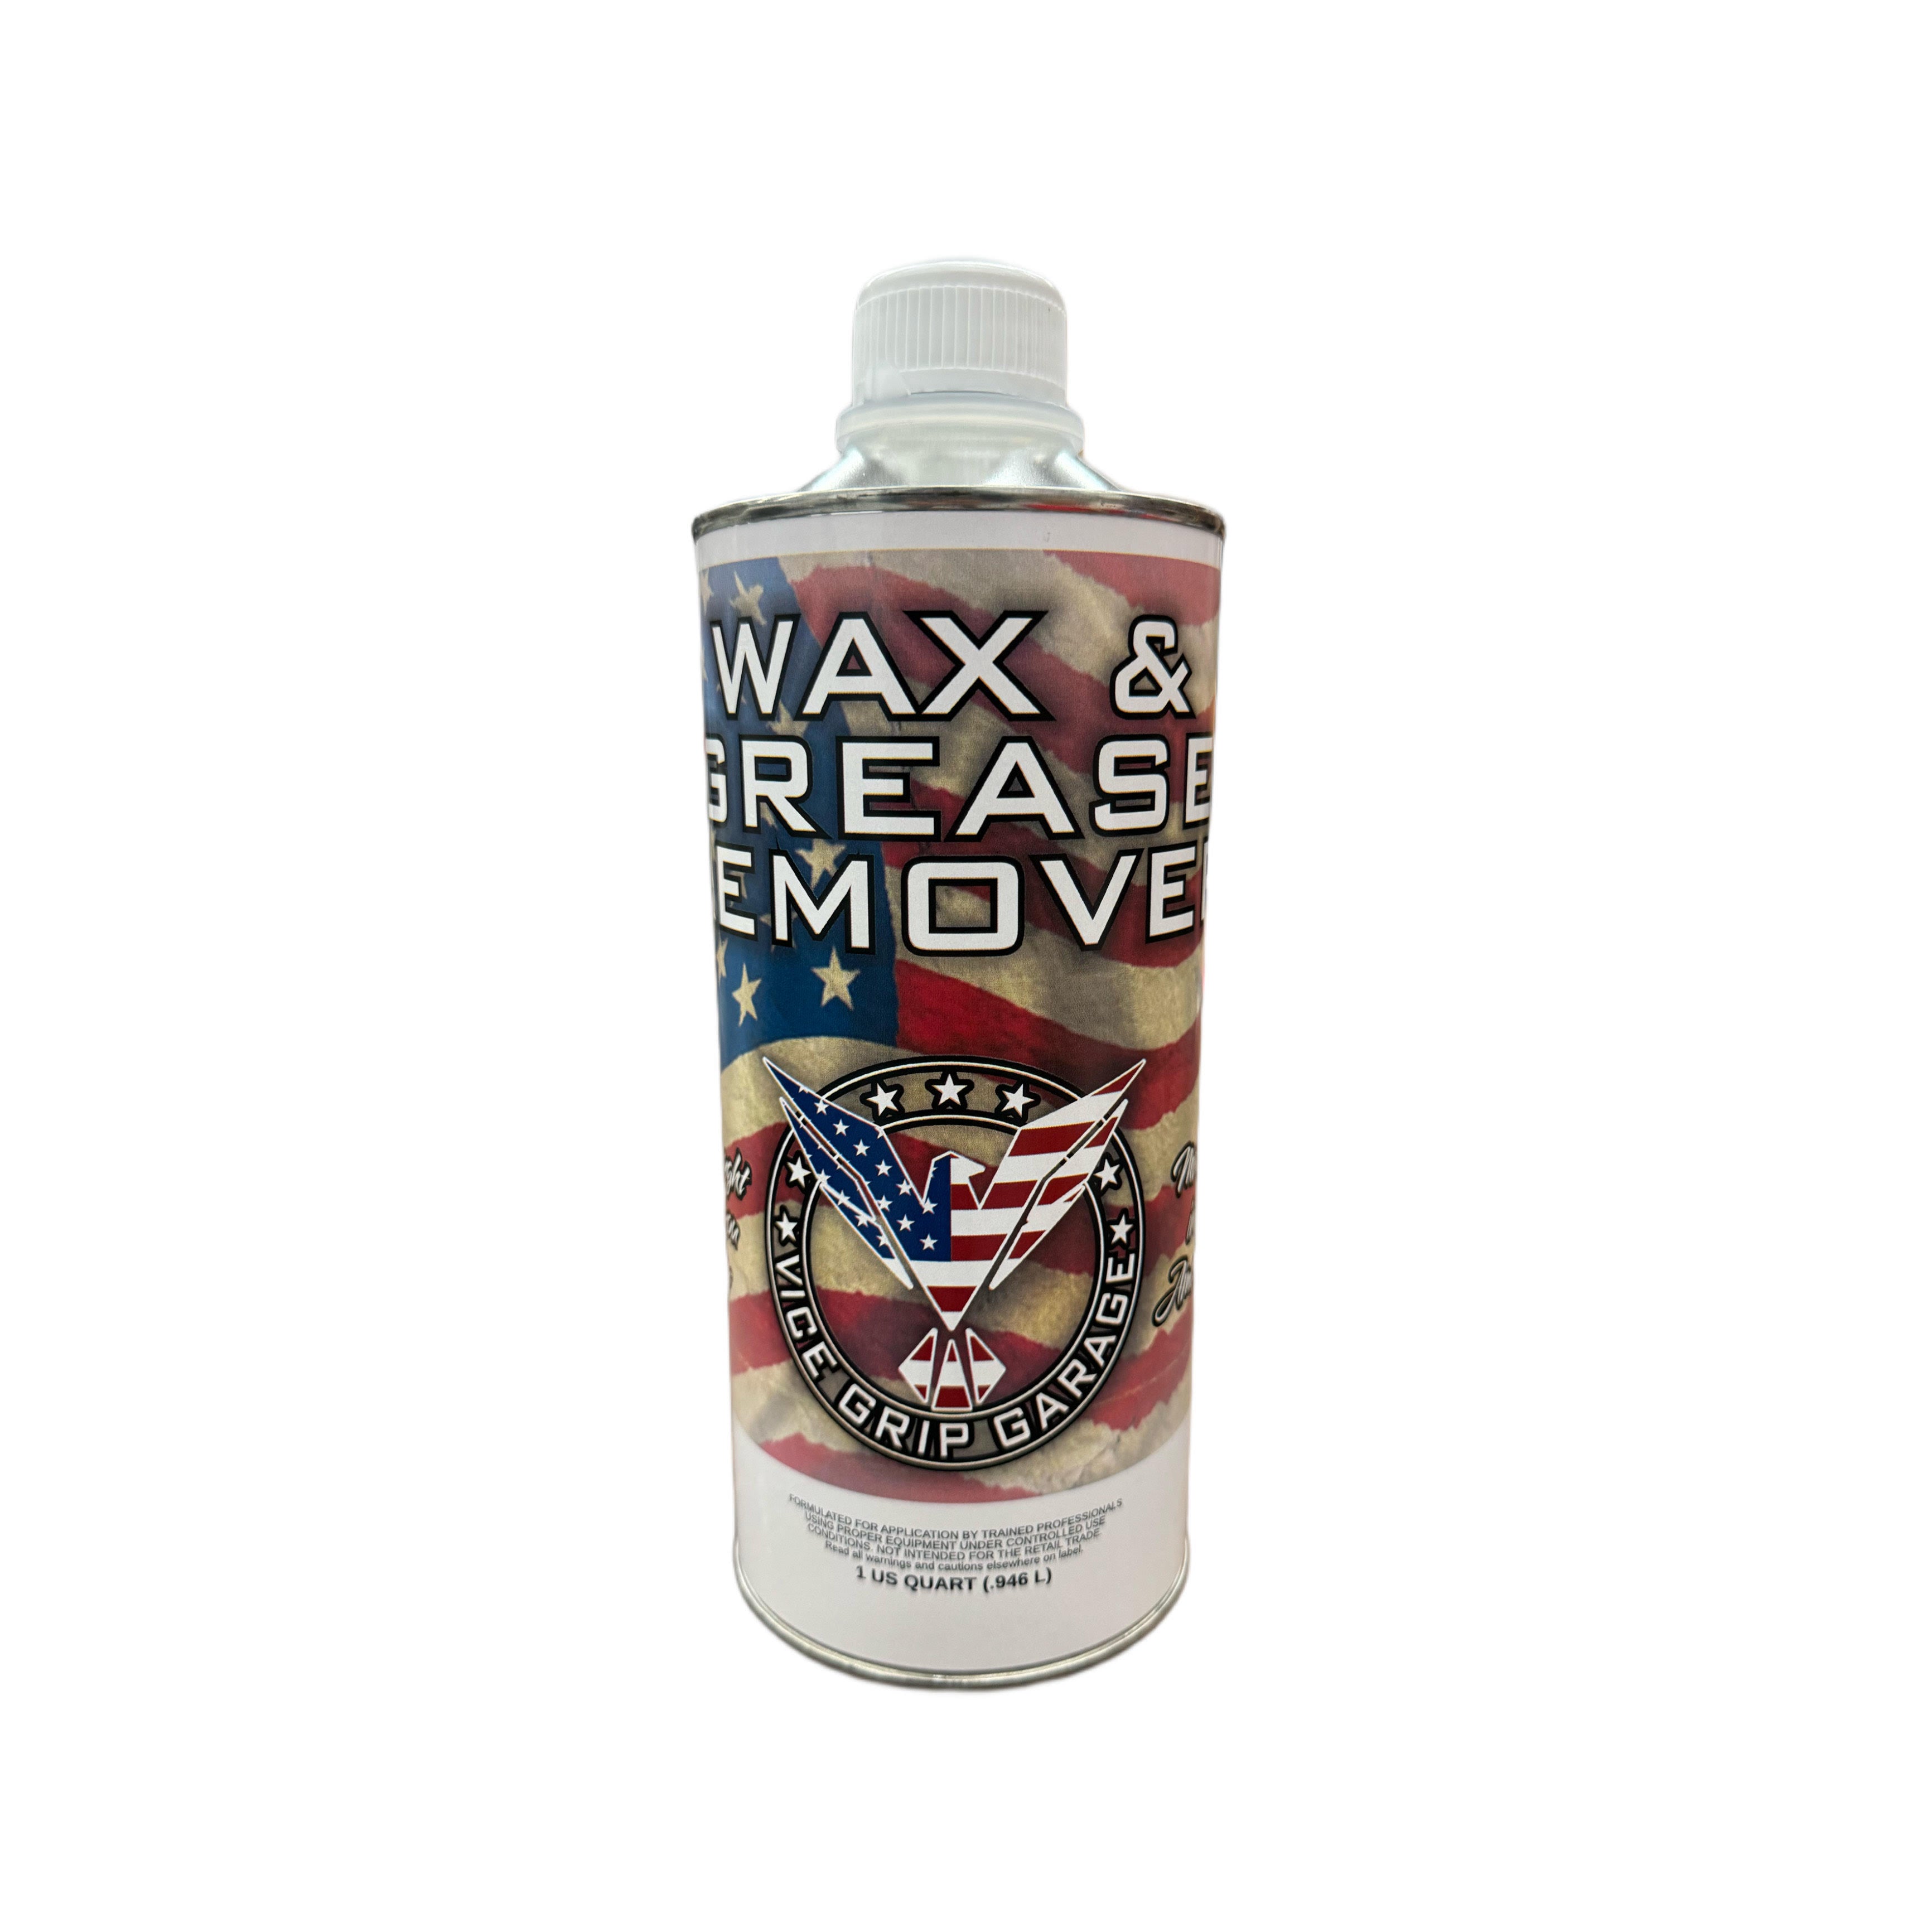 SprayMax 3680094 Wax and Grease Remover